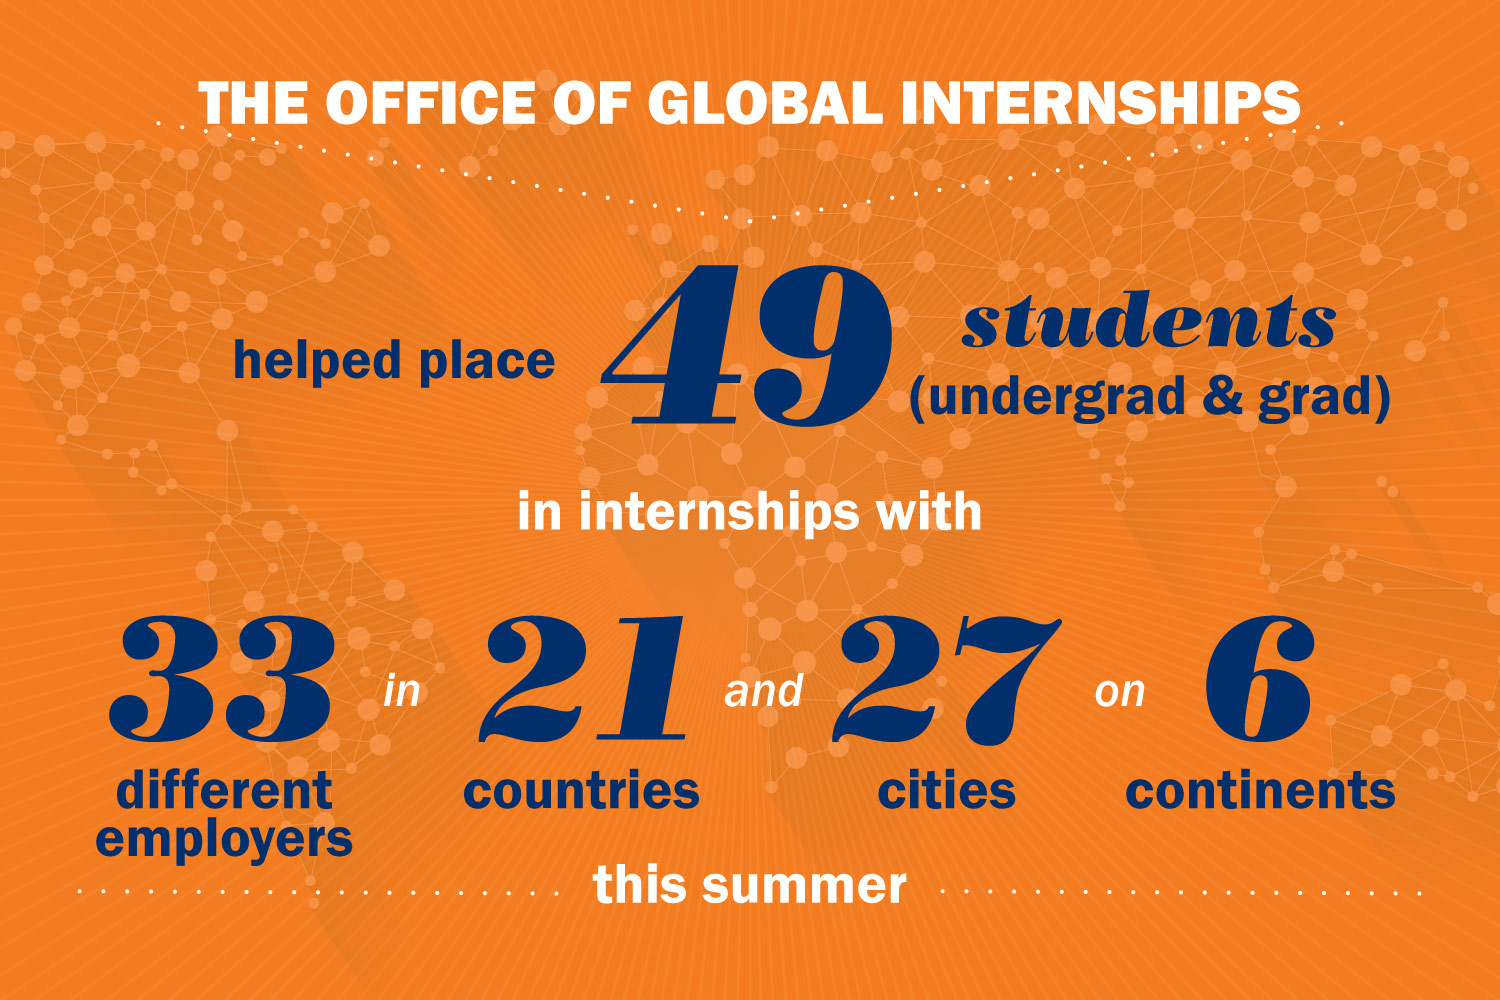 Text reads: The office of Global internships: Helped place 49 students (undergrad & Grad) in internships with 33 different employers in 21 countries and 27 cities on 6 continents this summer